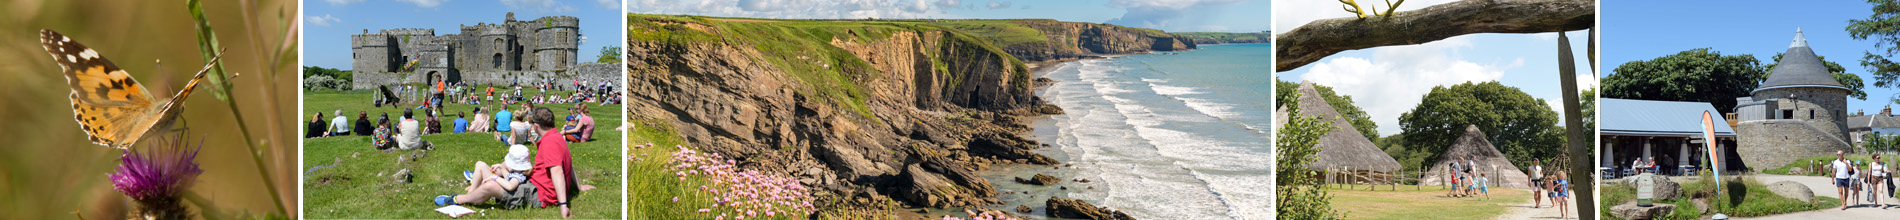 Montage of images showing scenery and wildlife from around the Pembrokeshire Coast National Park